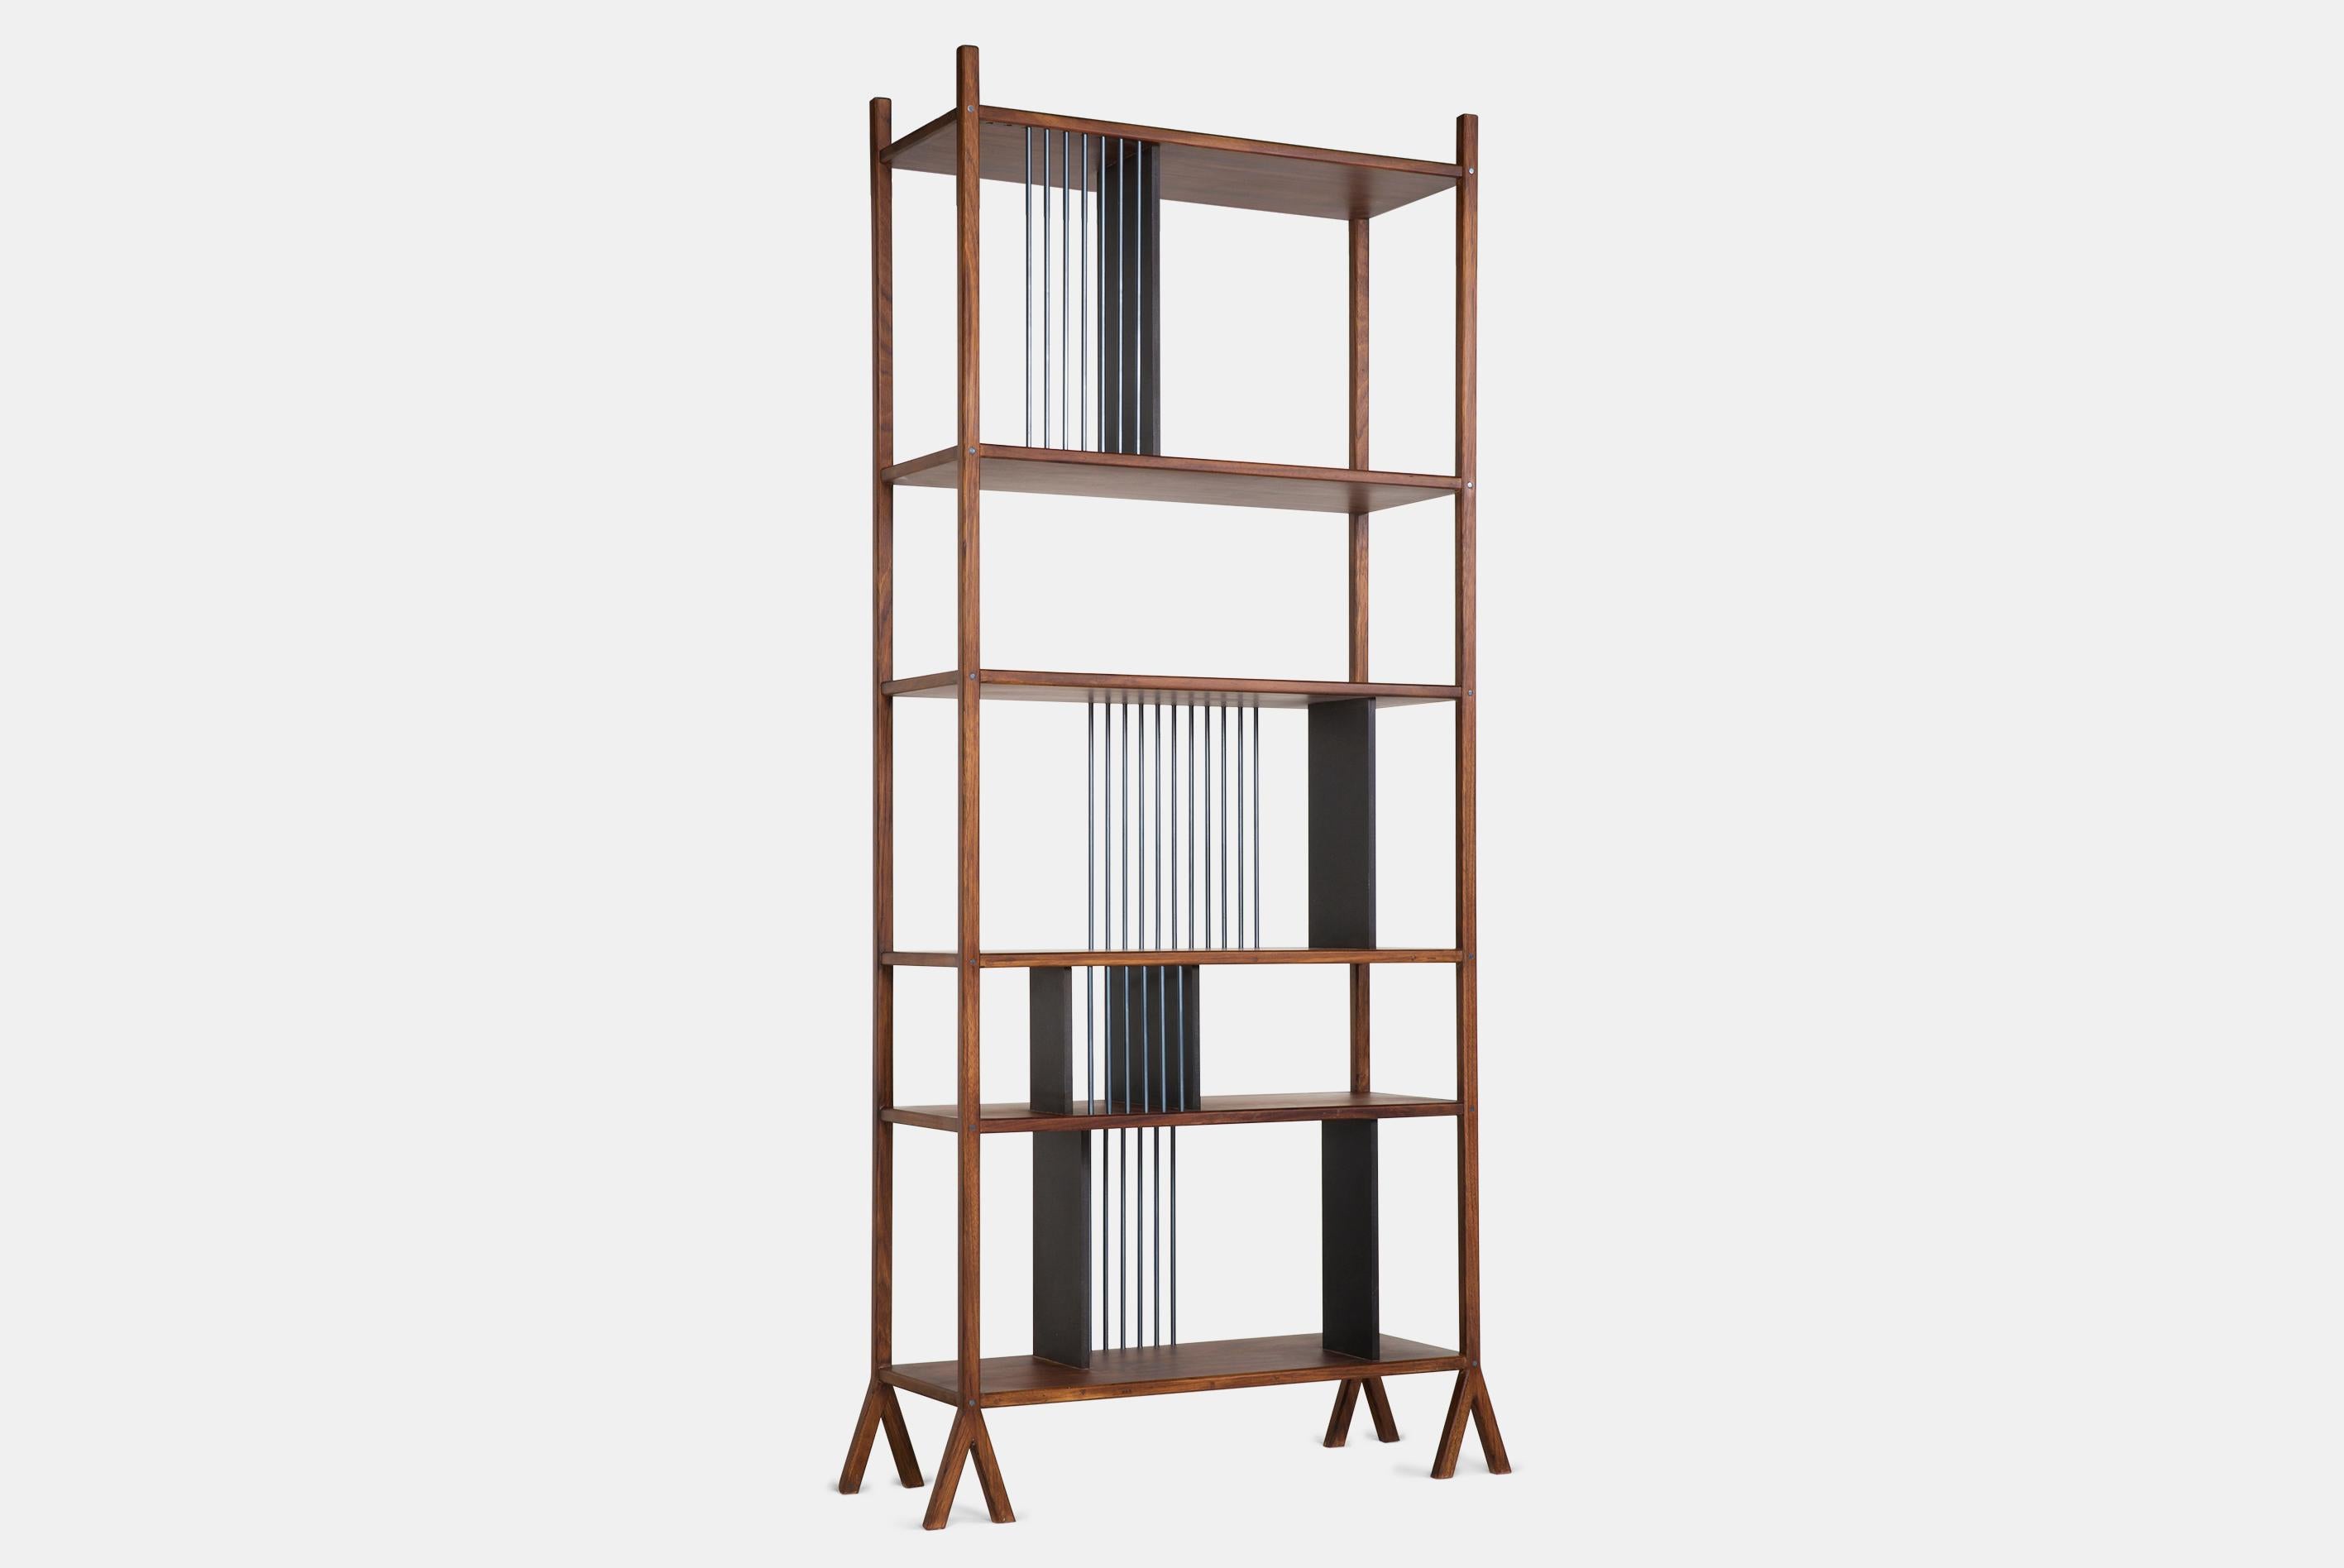 This two sided bookshelf stands out for its sleek design. This bookshelf was conceived as a compound of modular pieces that can be assembled in different variations depending on the client’s needs. The module B is the tallest version. This piece is